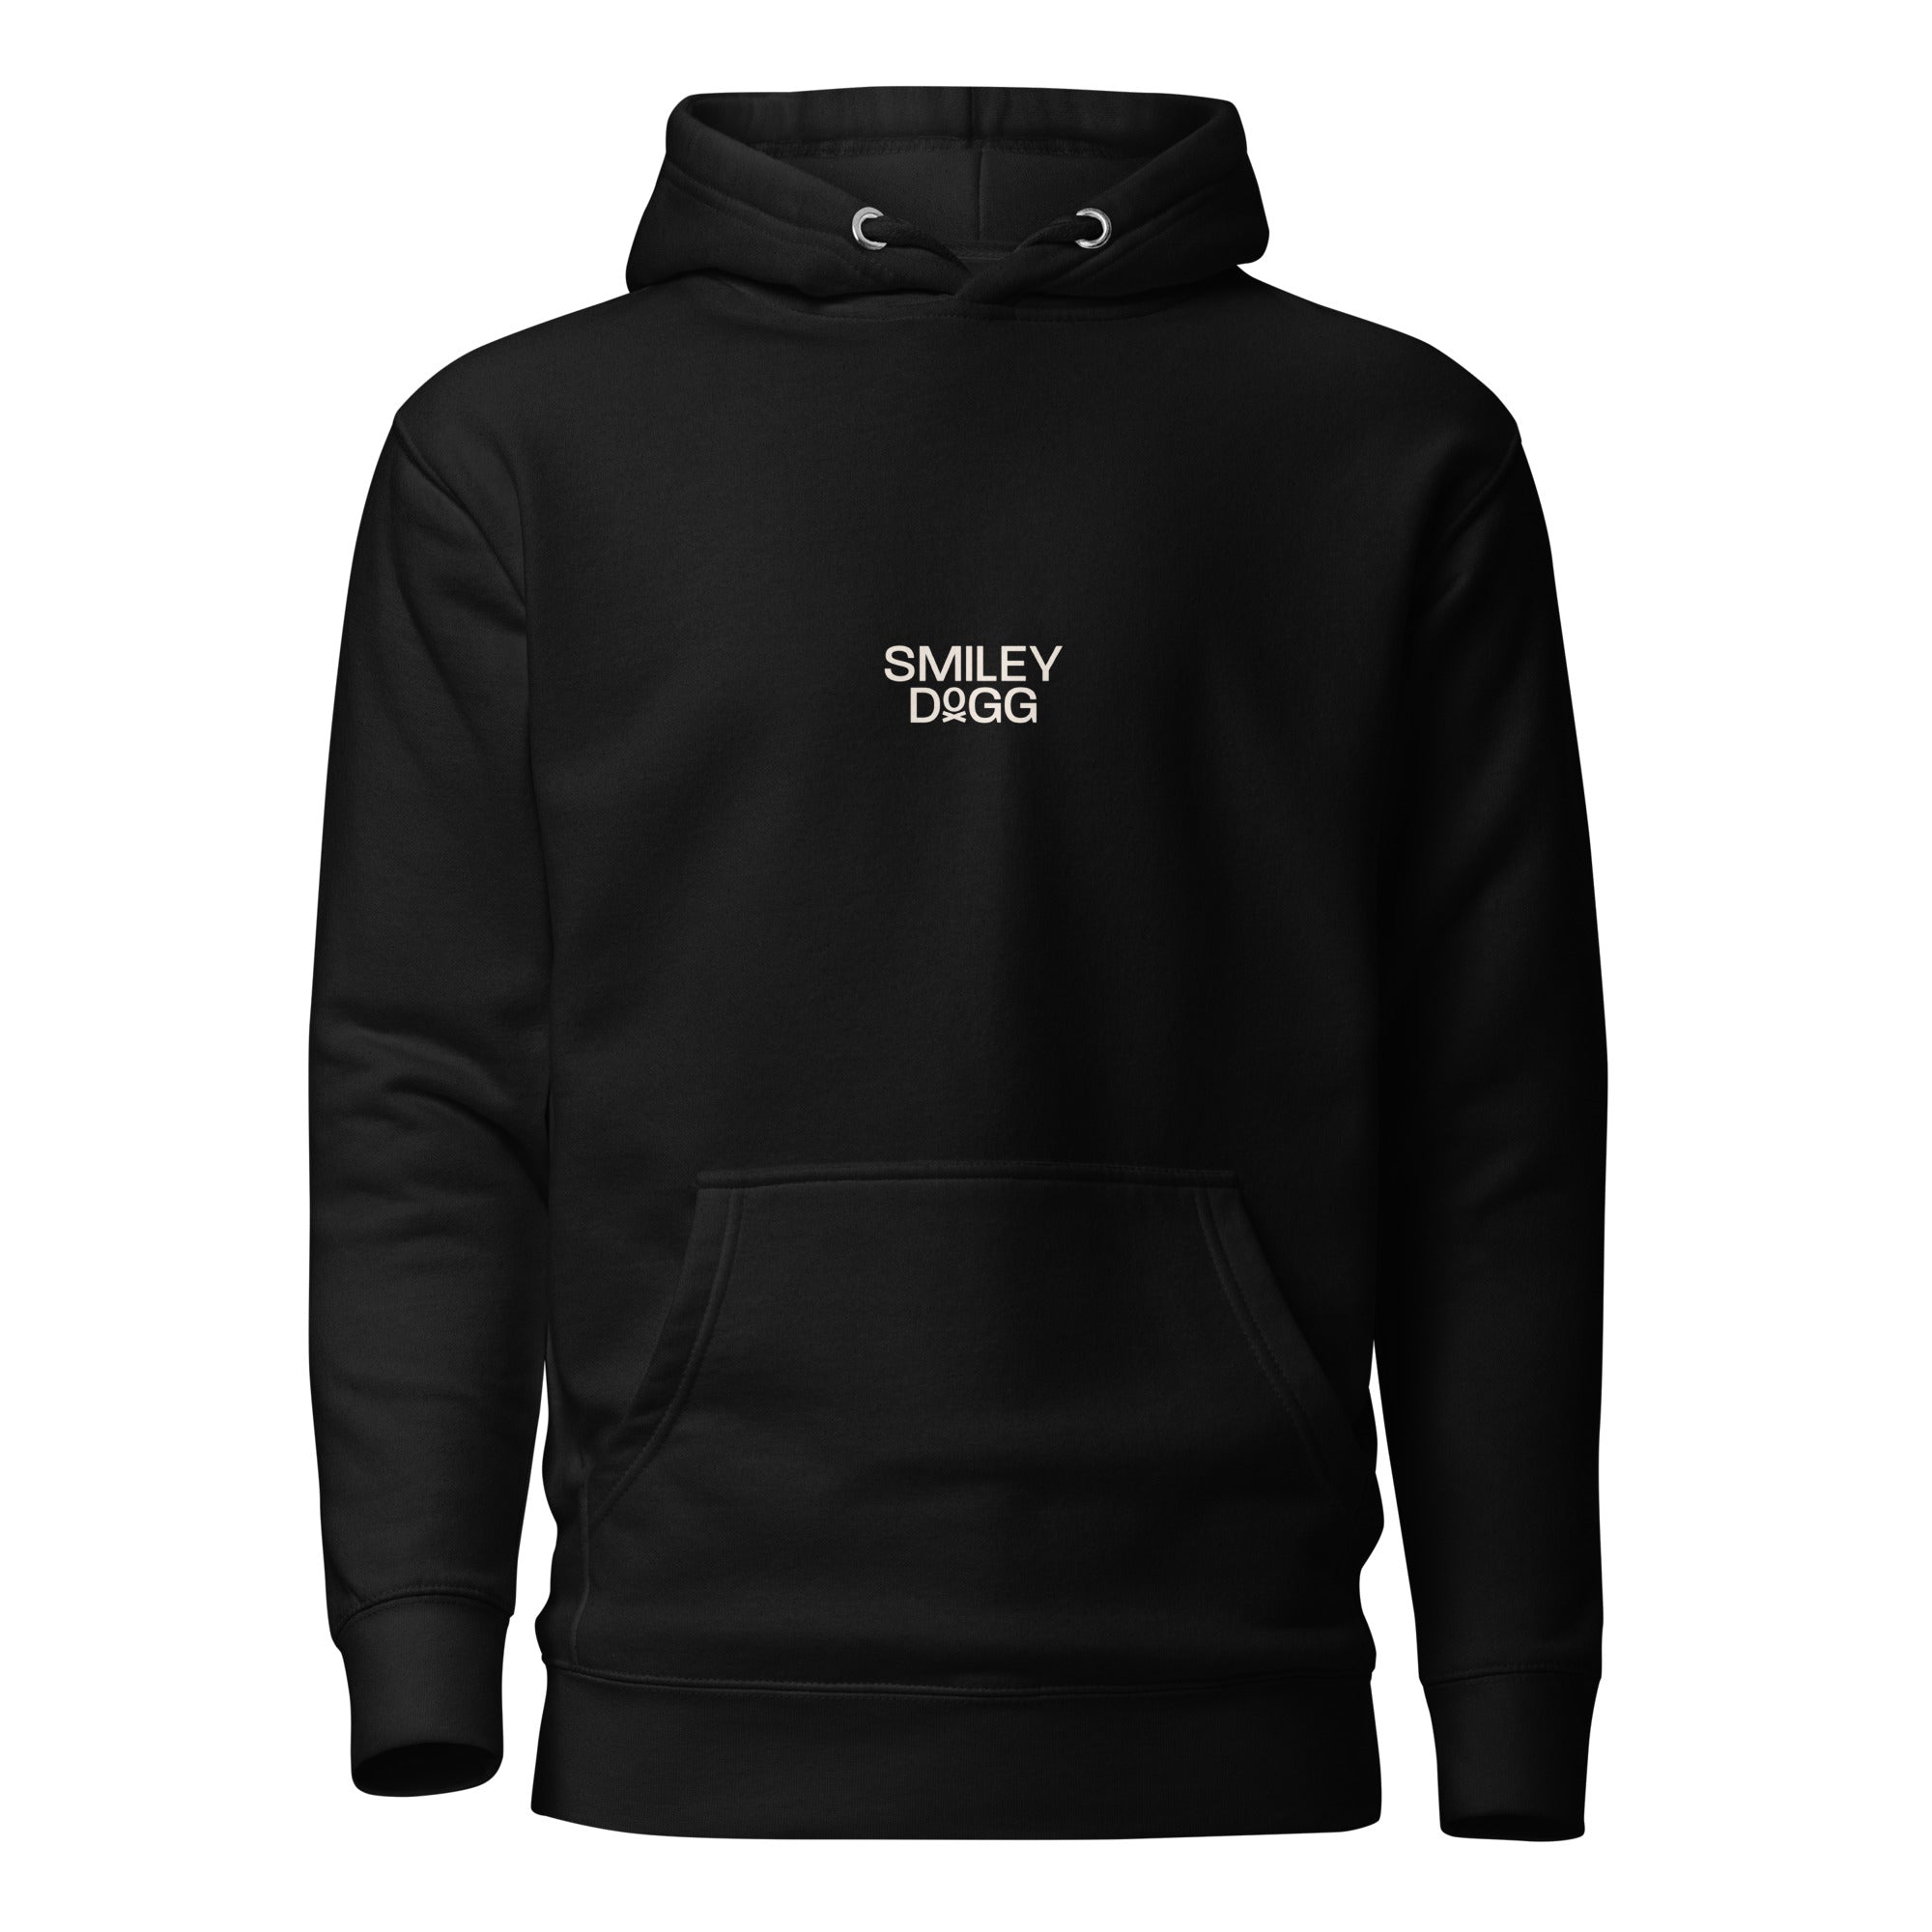 Ink Your Story - Unisex Hoodie